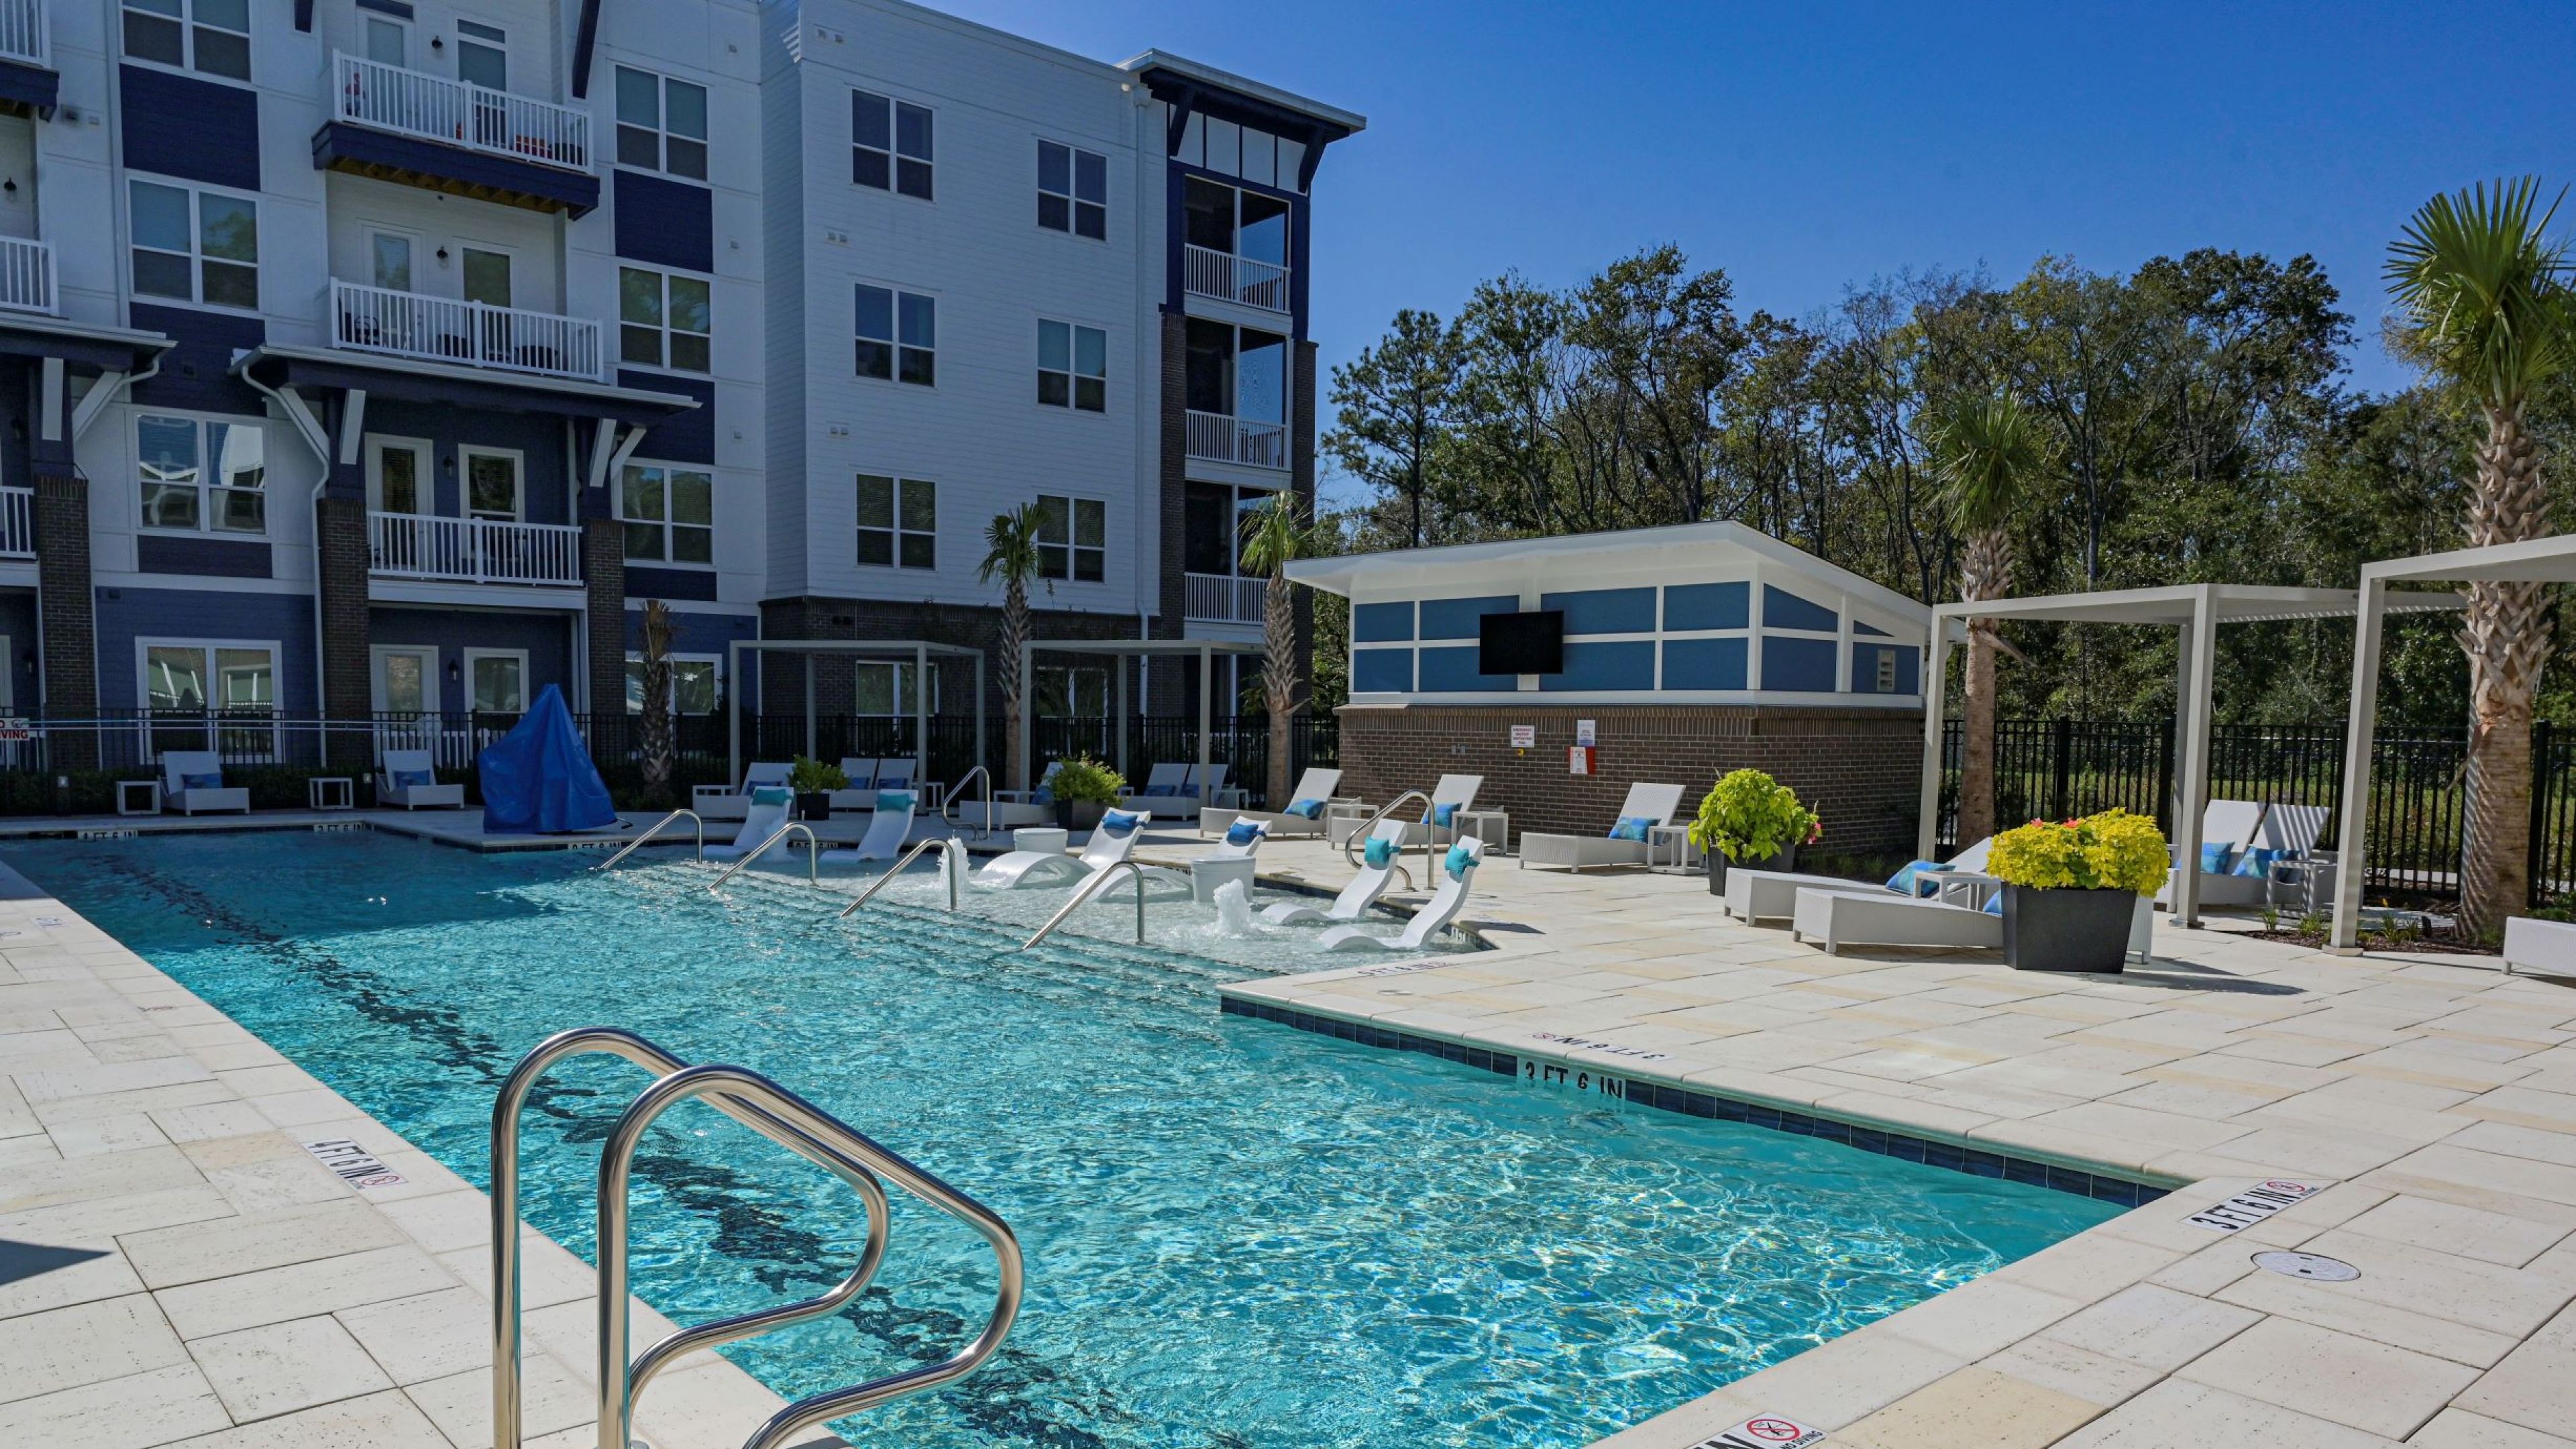 Hawthorne at Indy West luxury outdoor pool with surrounding lounge seating in front of apartments building